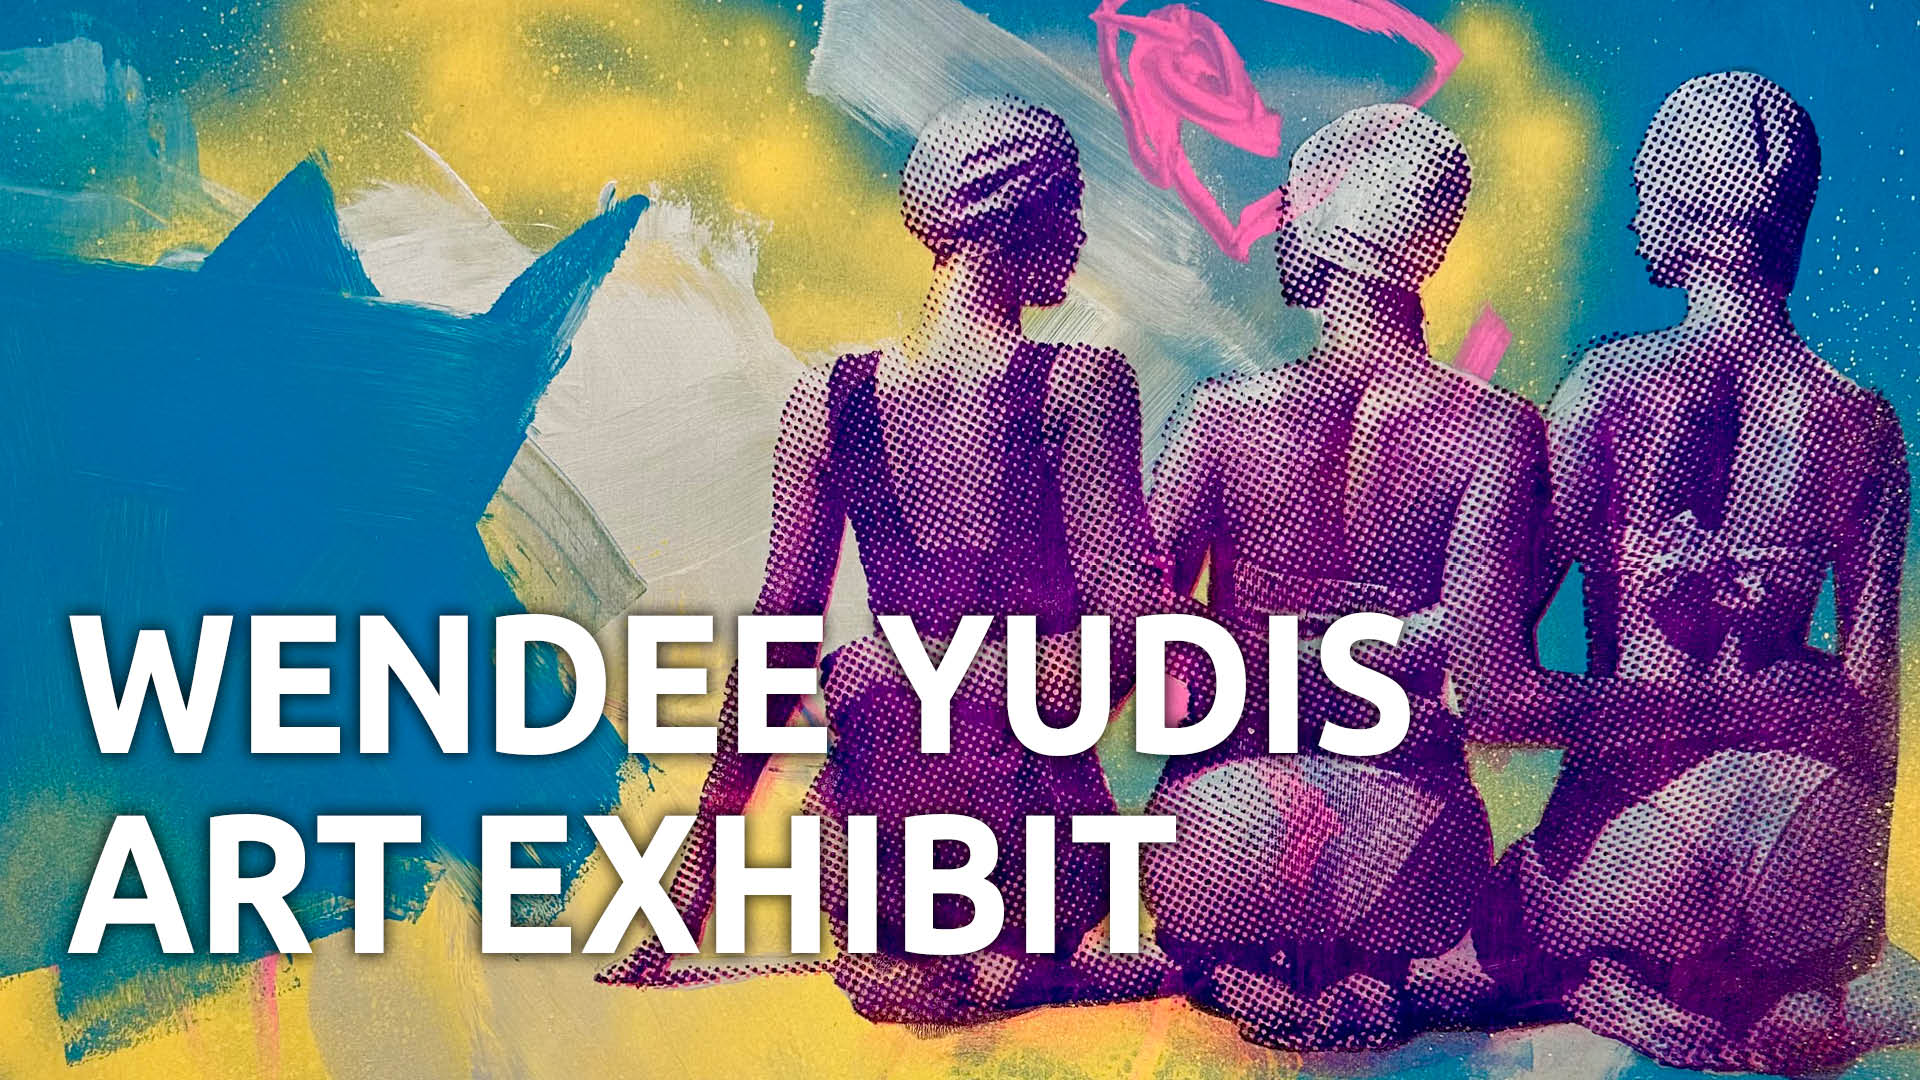 Read more about the article Wendee Yudis Art Exhibit